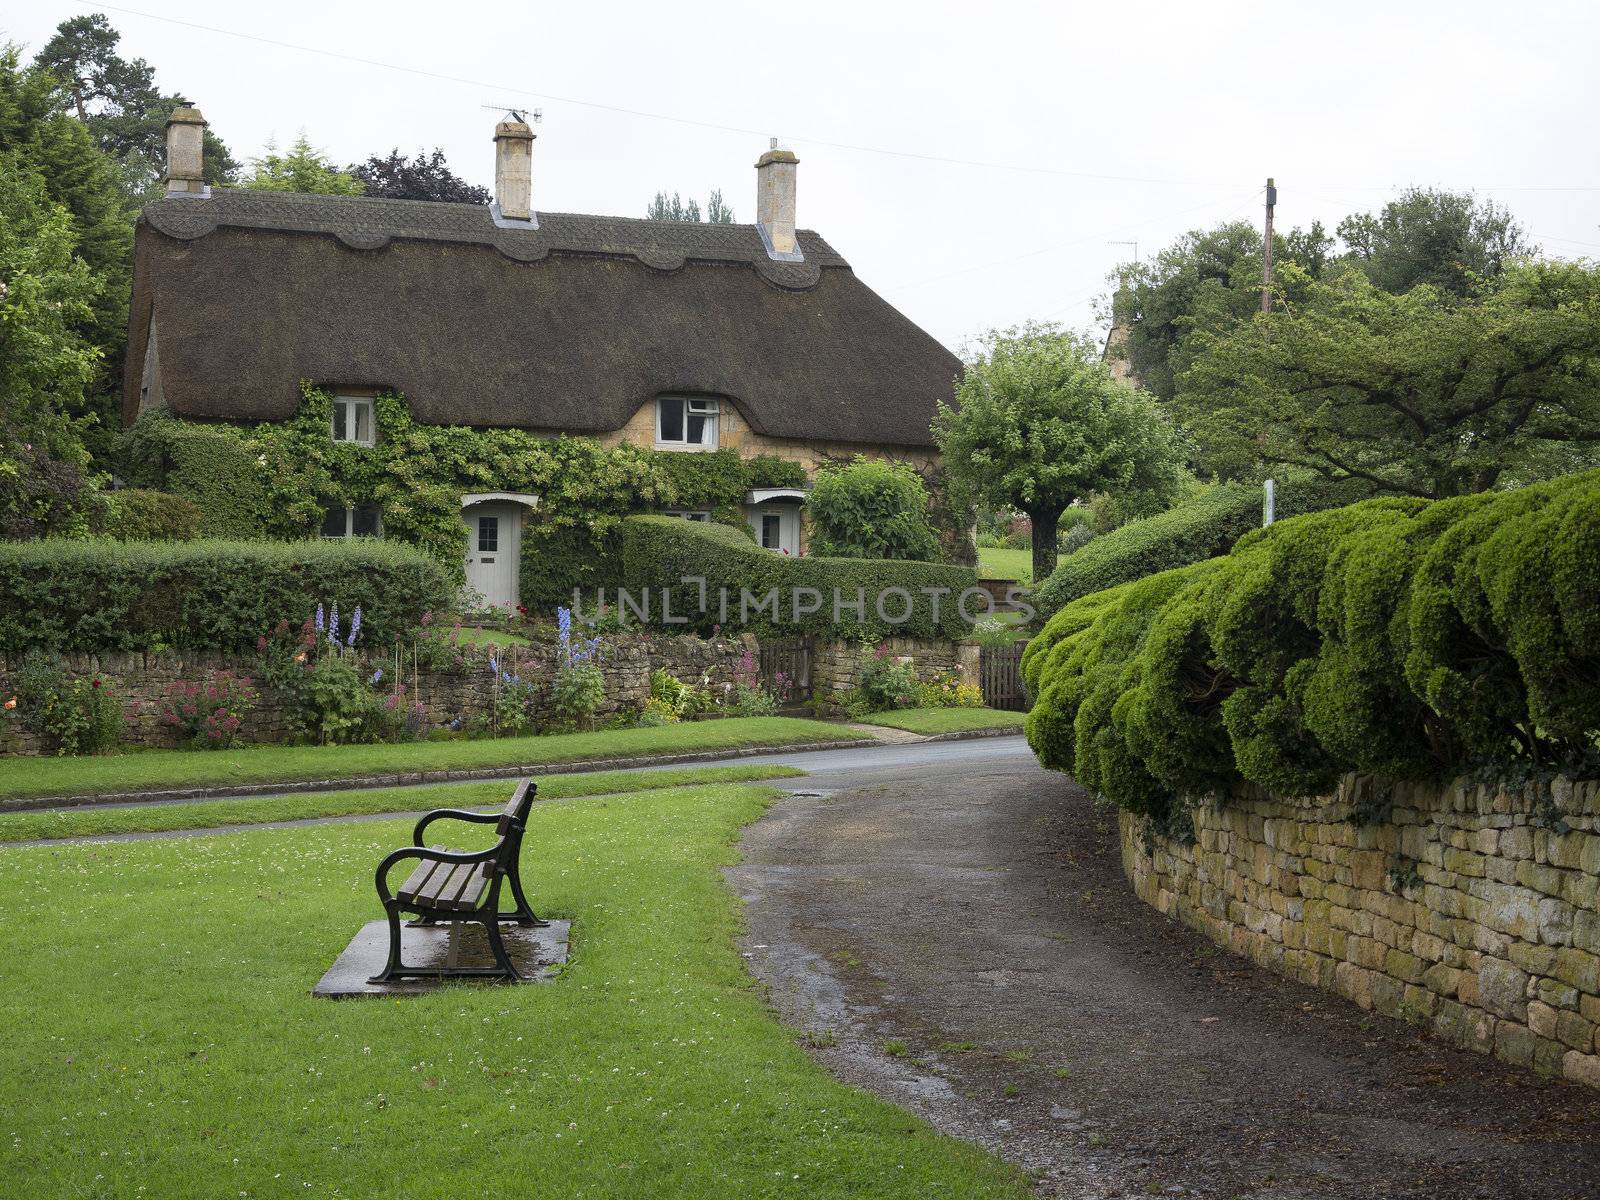 Beautiful old cottage with thatched roof and great hedges in the village of Chipping Campden, Cotswold, United Kingdom.